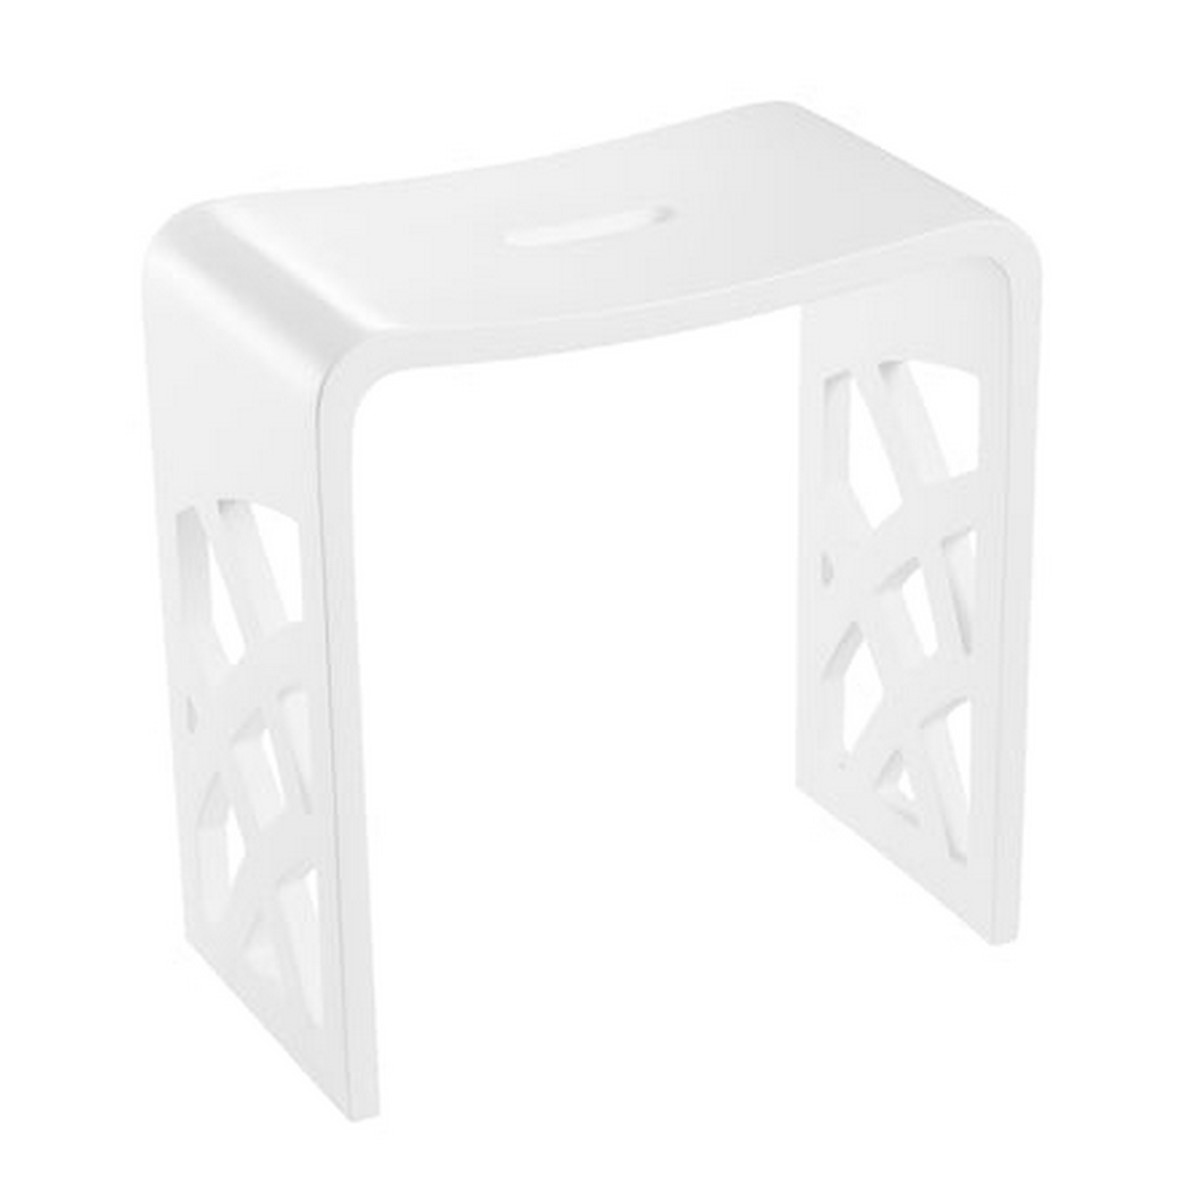 BARCLAY 6216 16 1/2 INCH RESIN RECTANGULAR CURVED SEAT SHOWER STOOL